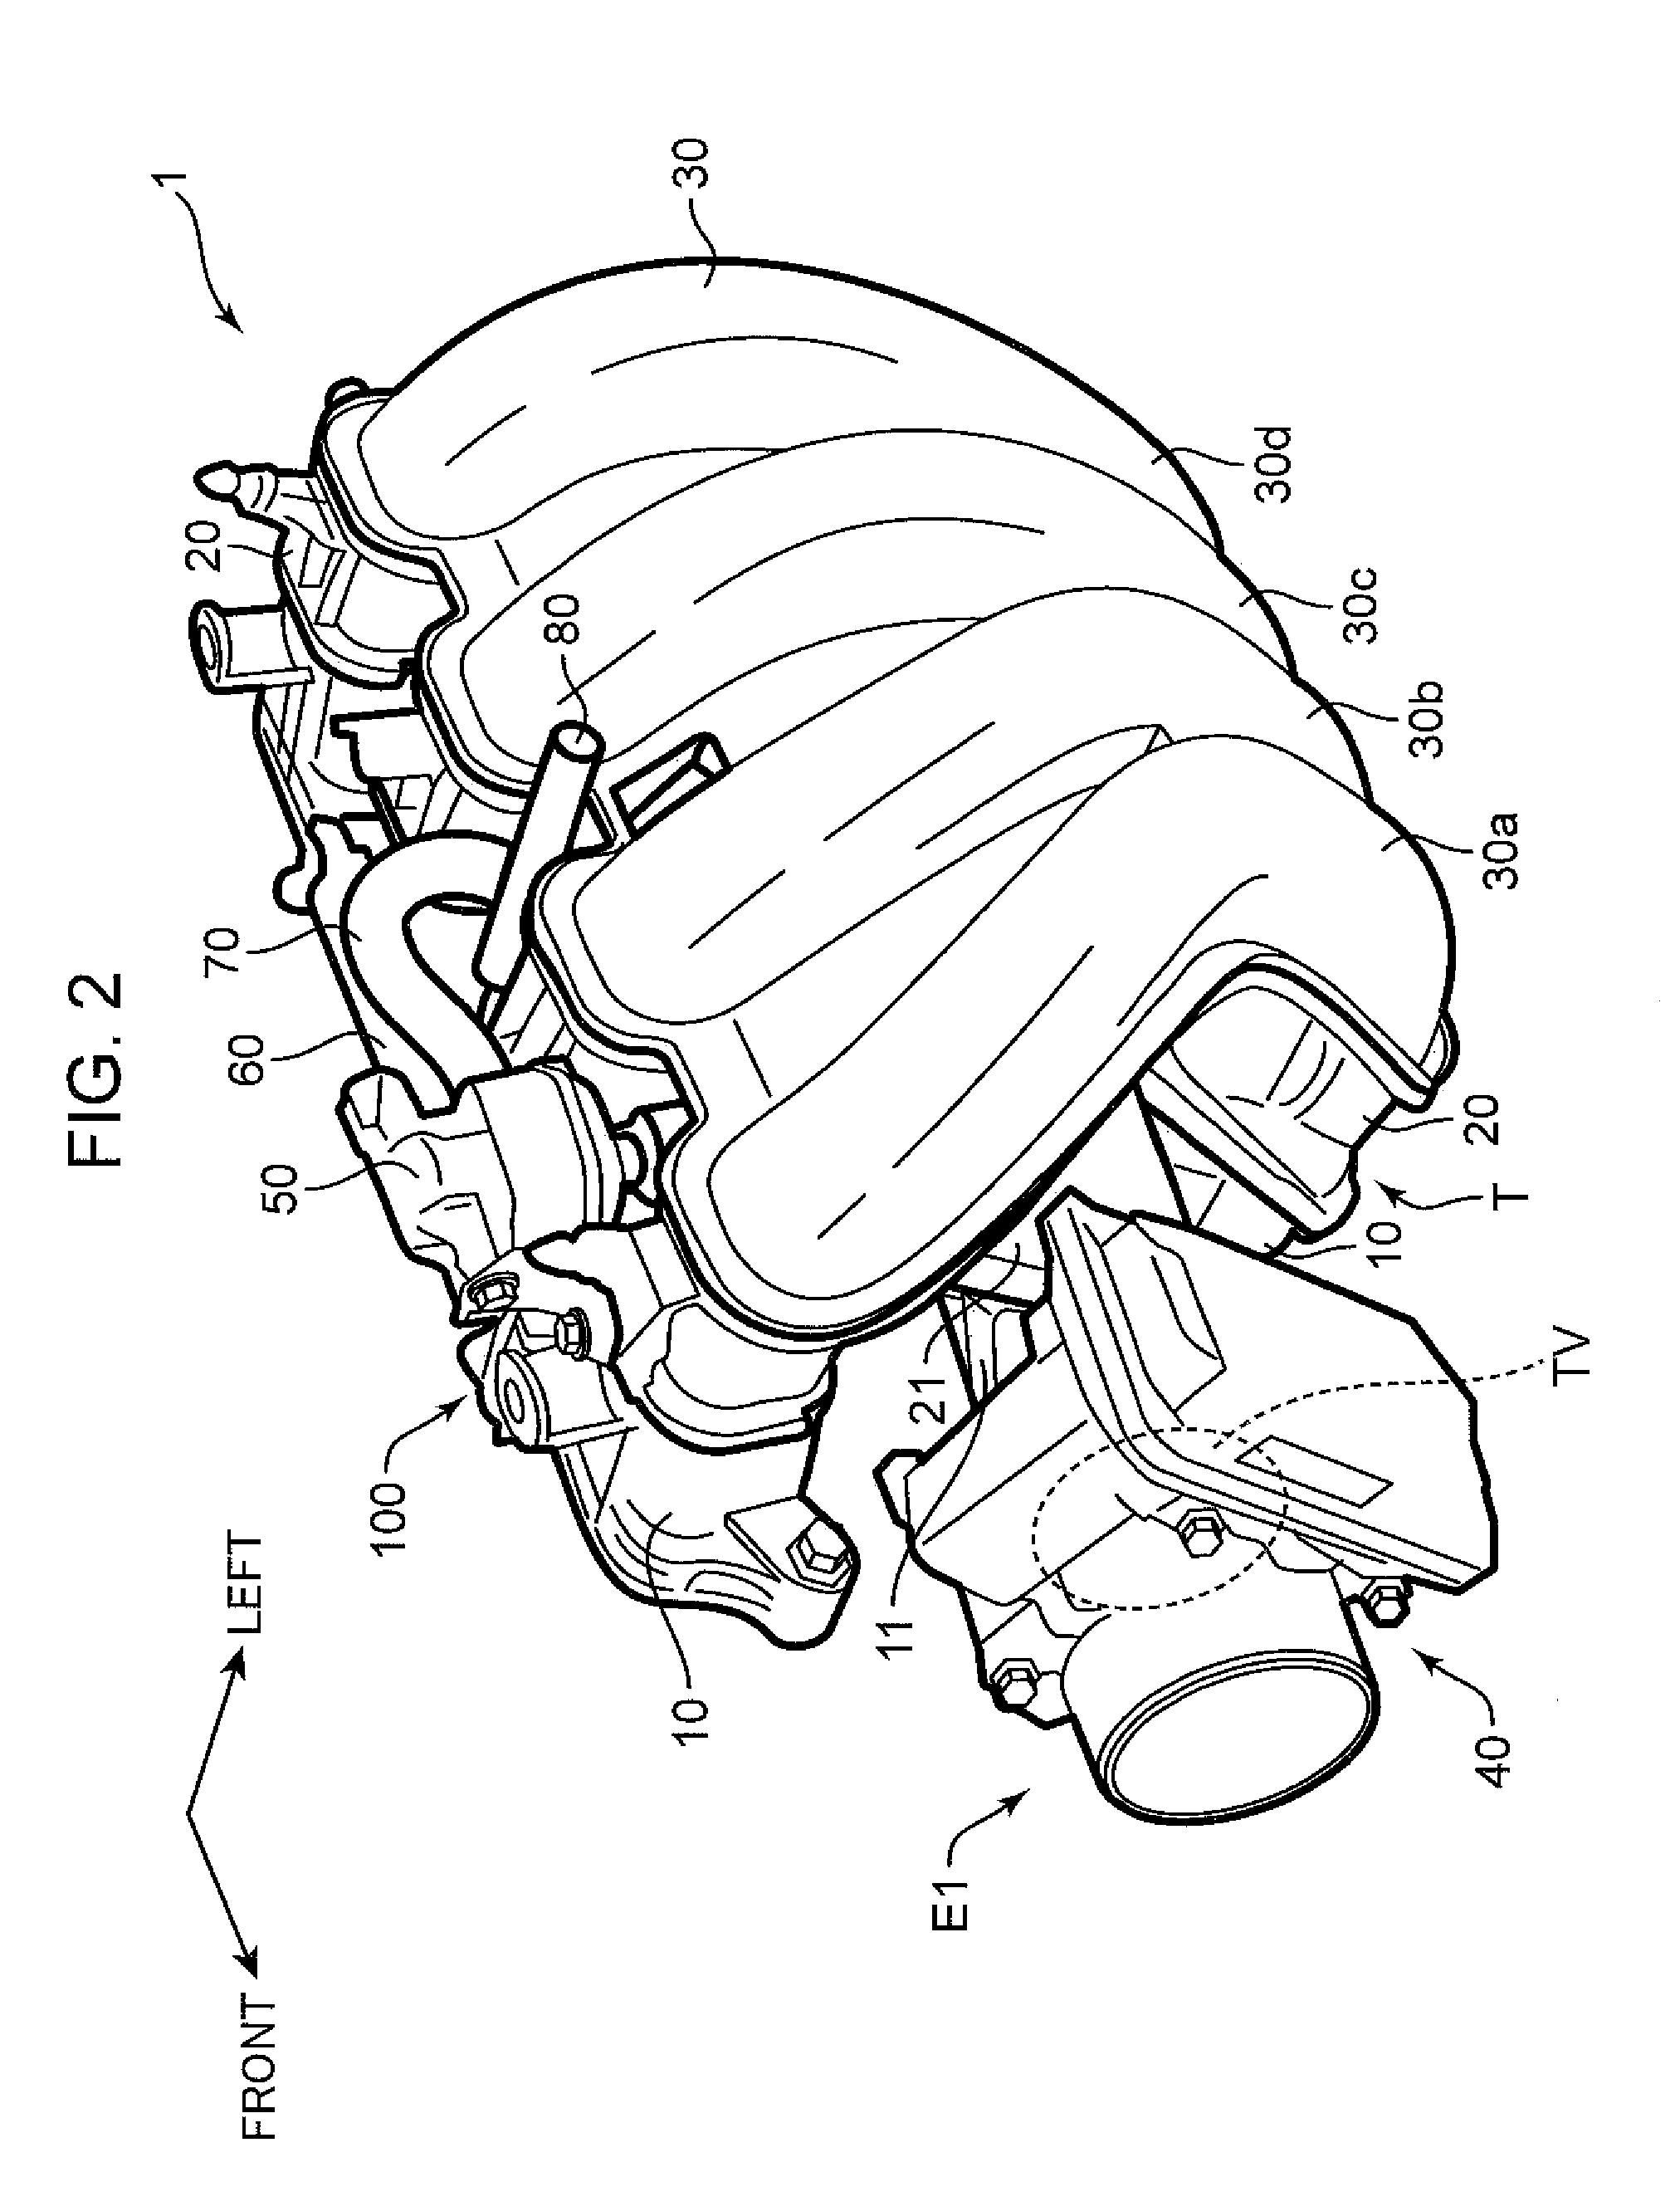 Intake manifold structure for engine